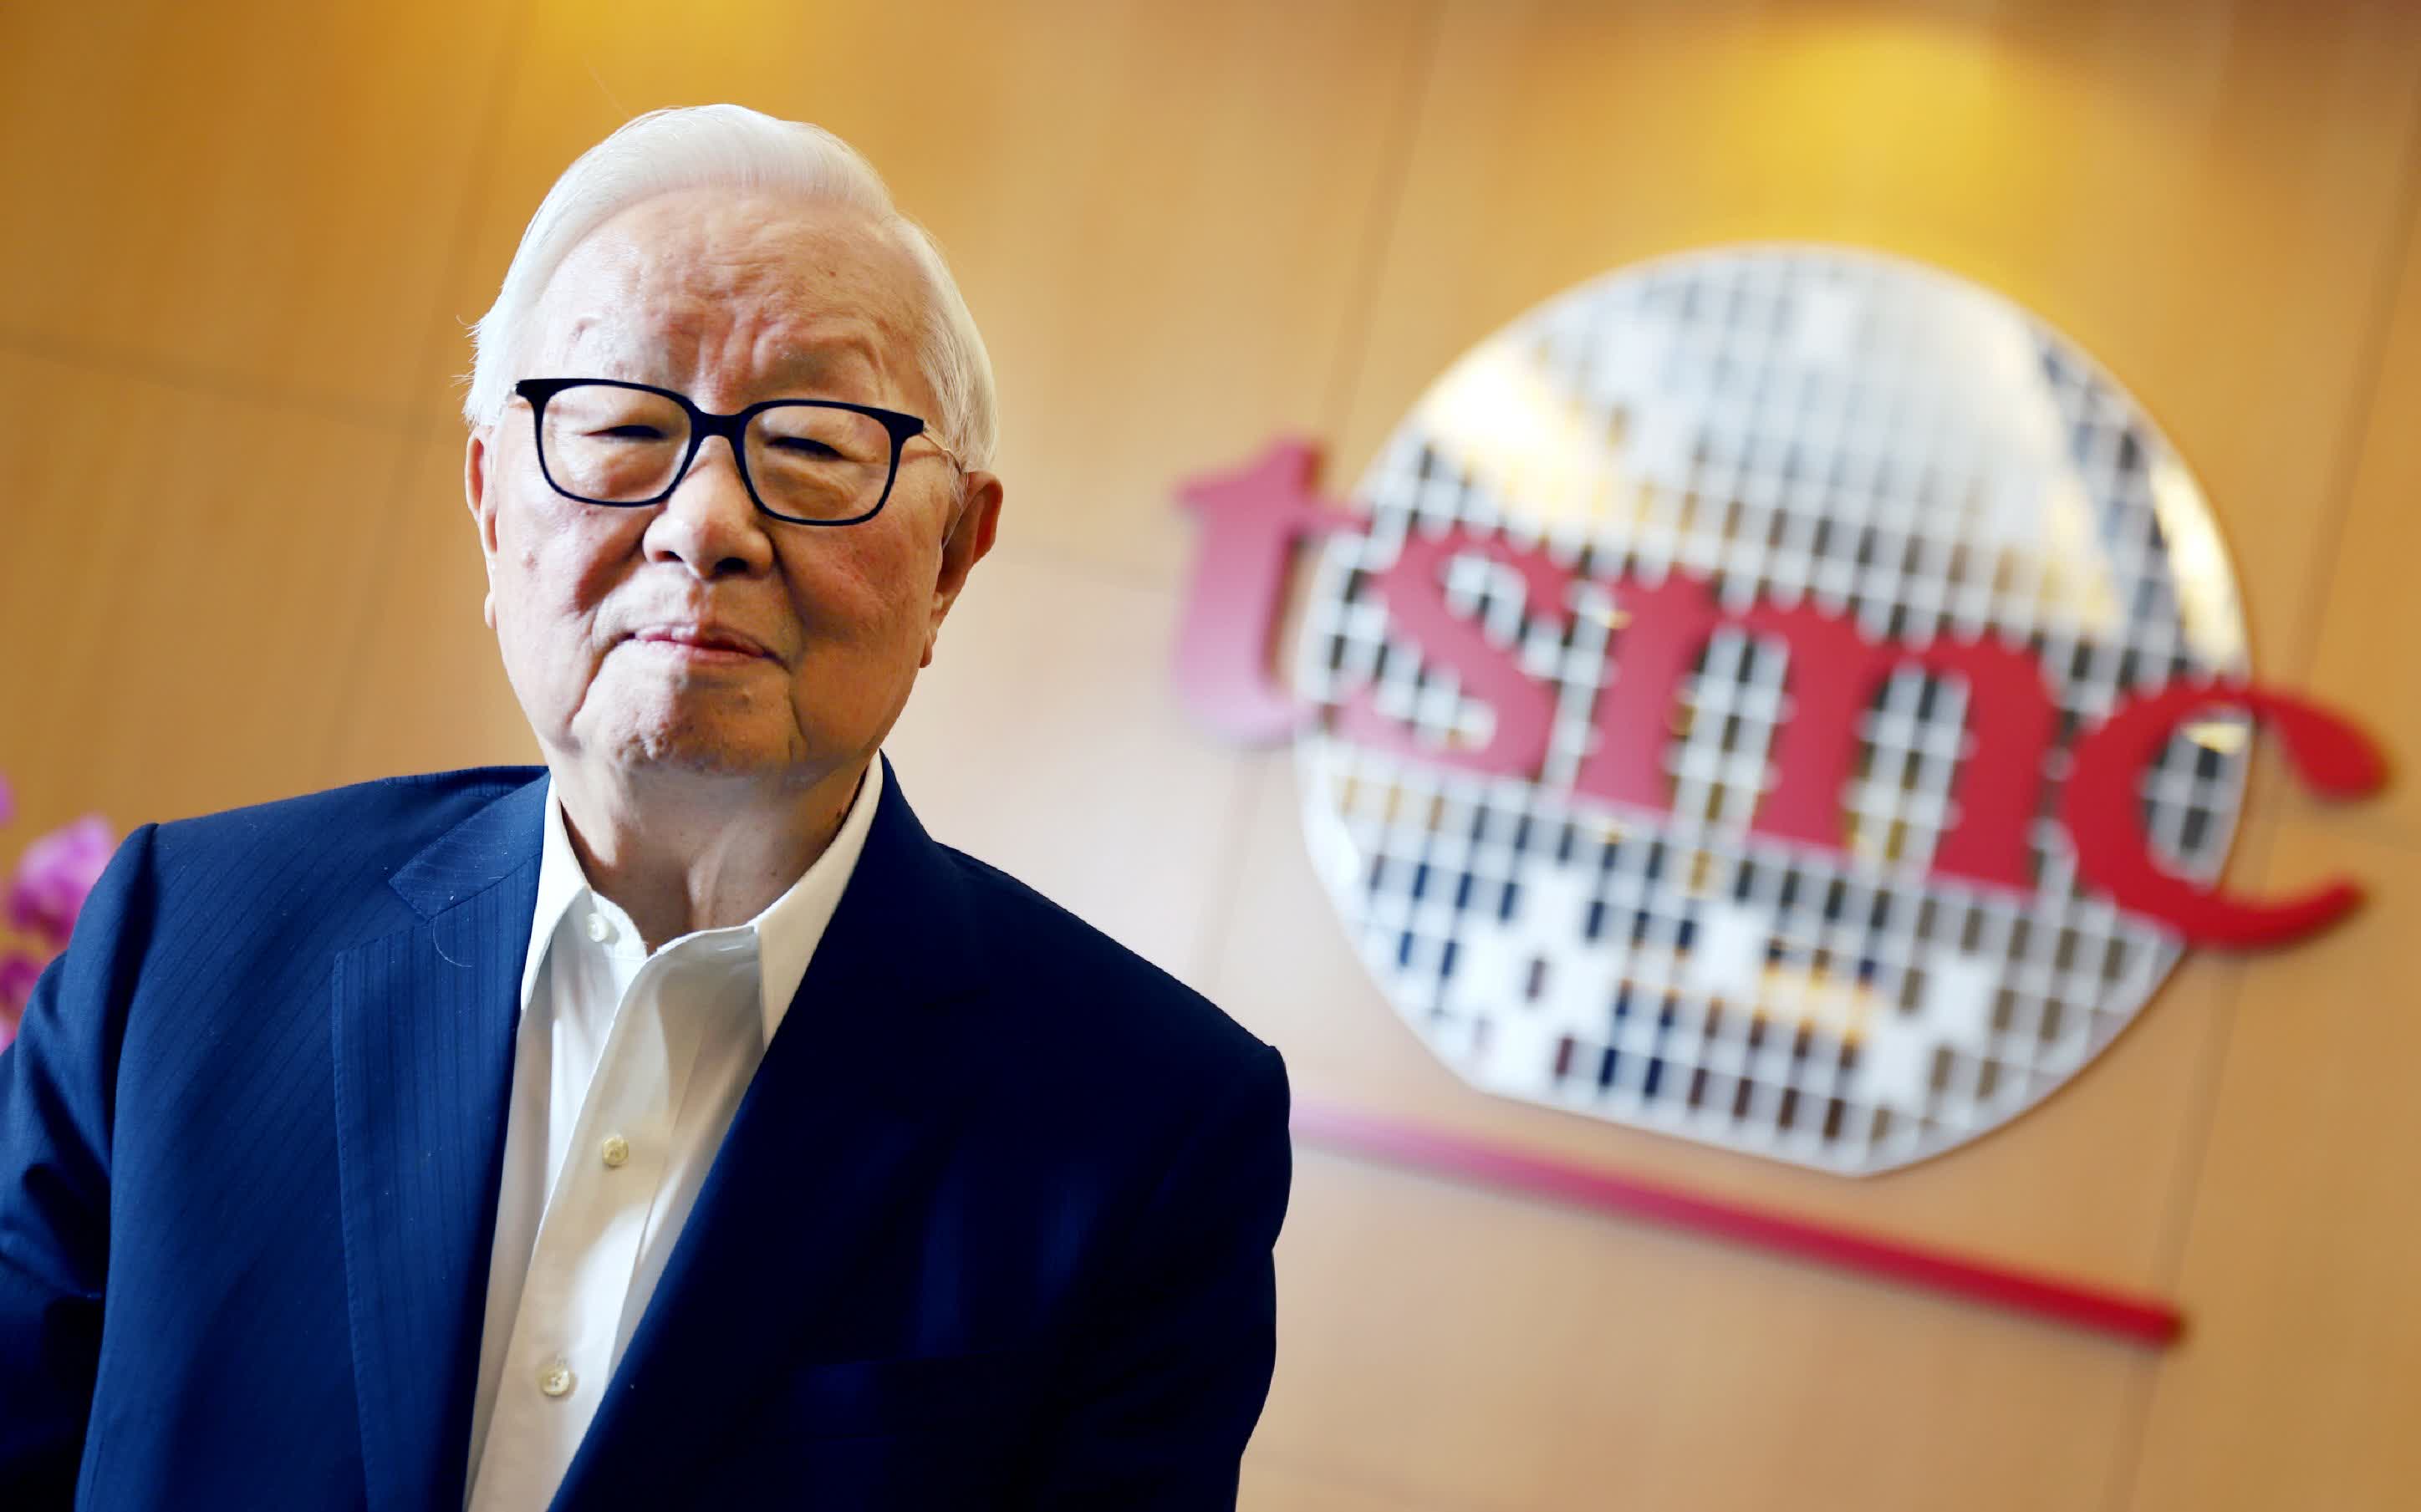 TSMC founder Morris Chang supports China chip sanctions, but voices doubts on Chips Act